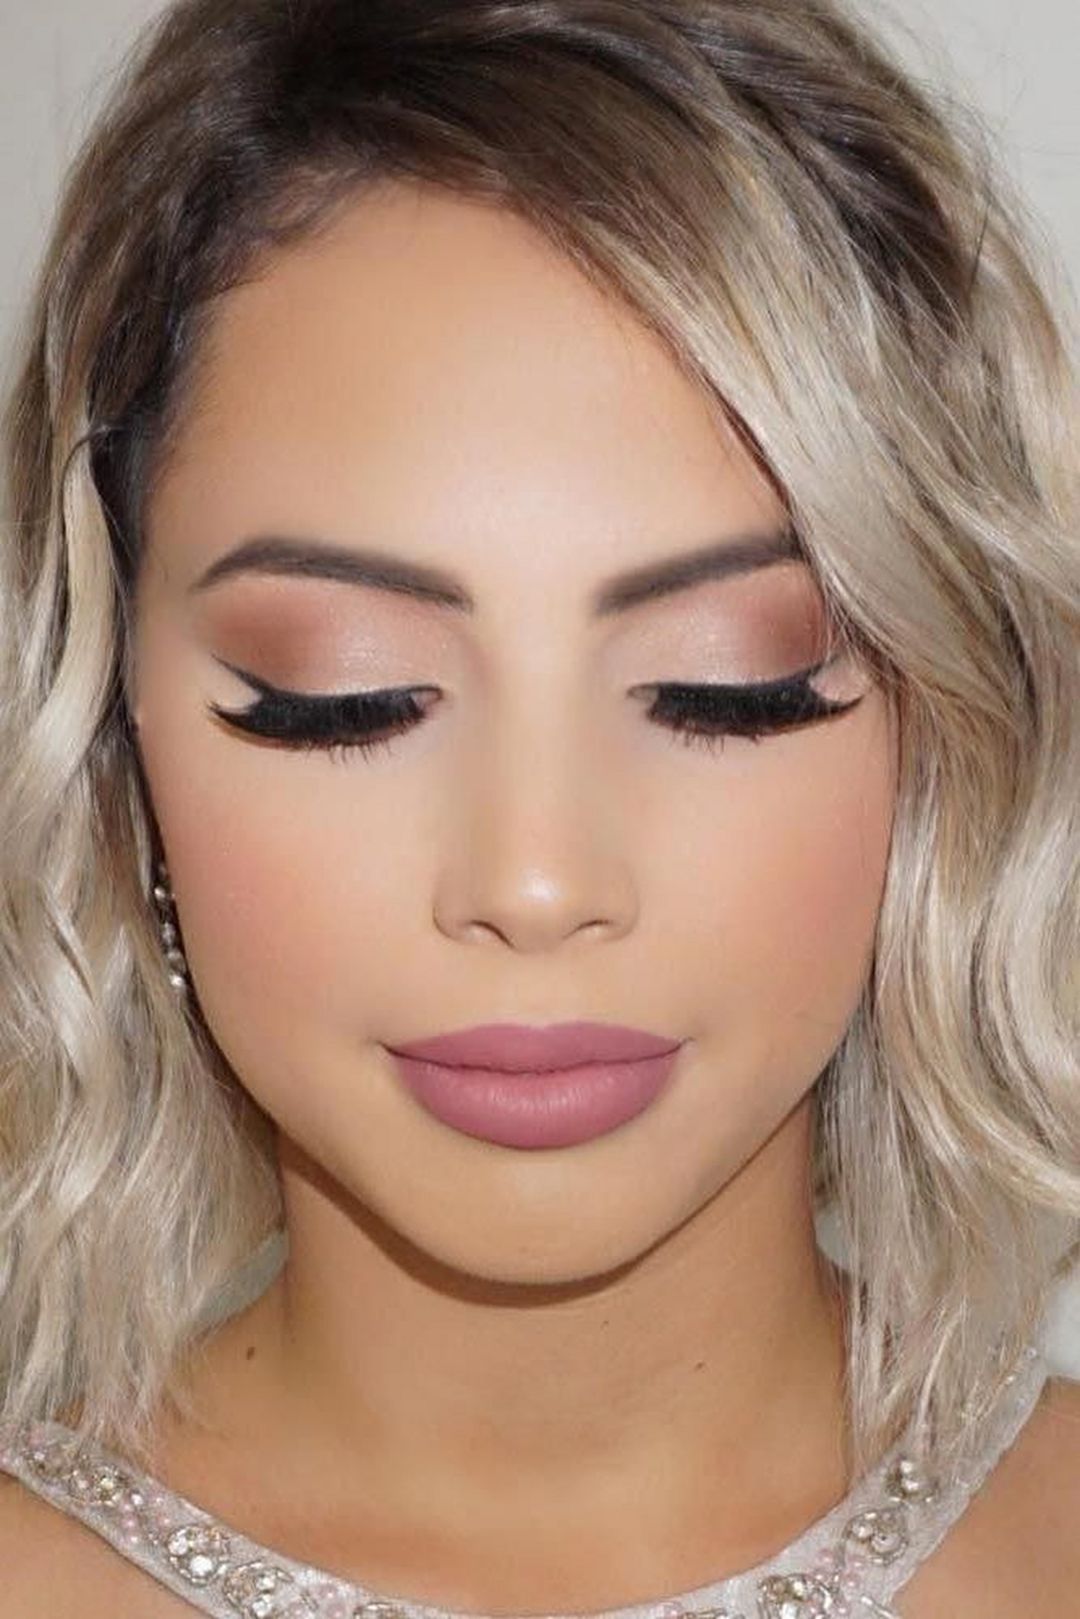 15 Simple And Memorable Makeup Ideas You Can Rely On For Parties - Fashions Nowadays -   10 makeup Simple casamento ideas